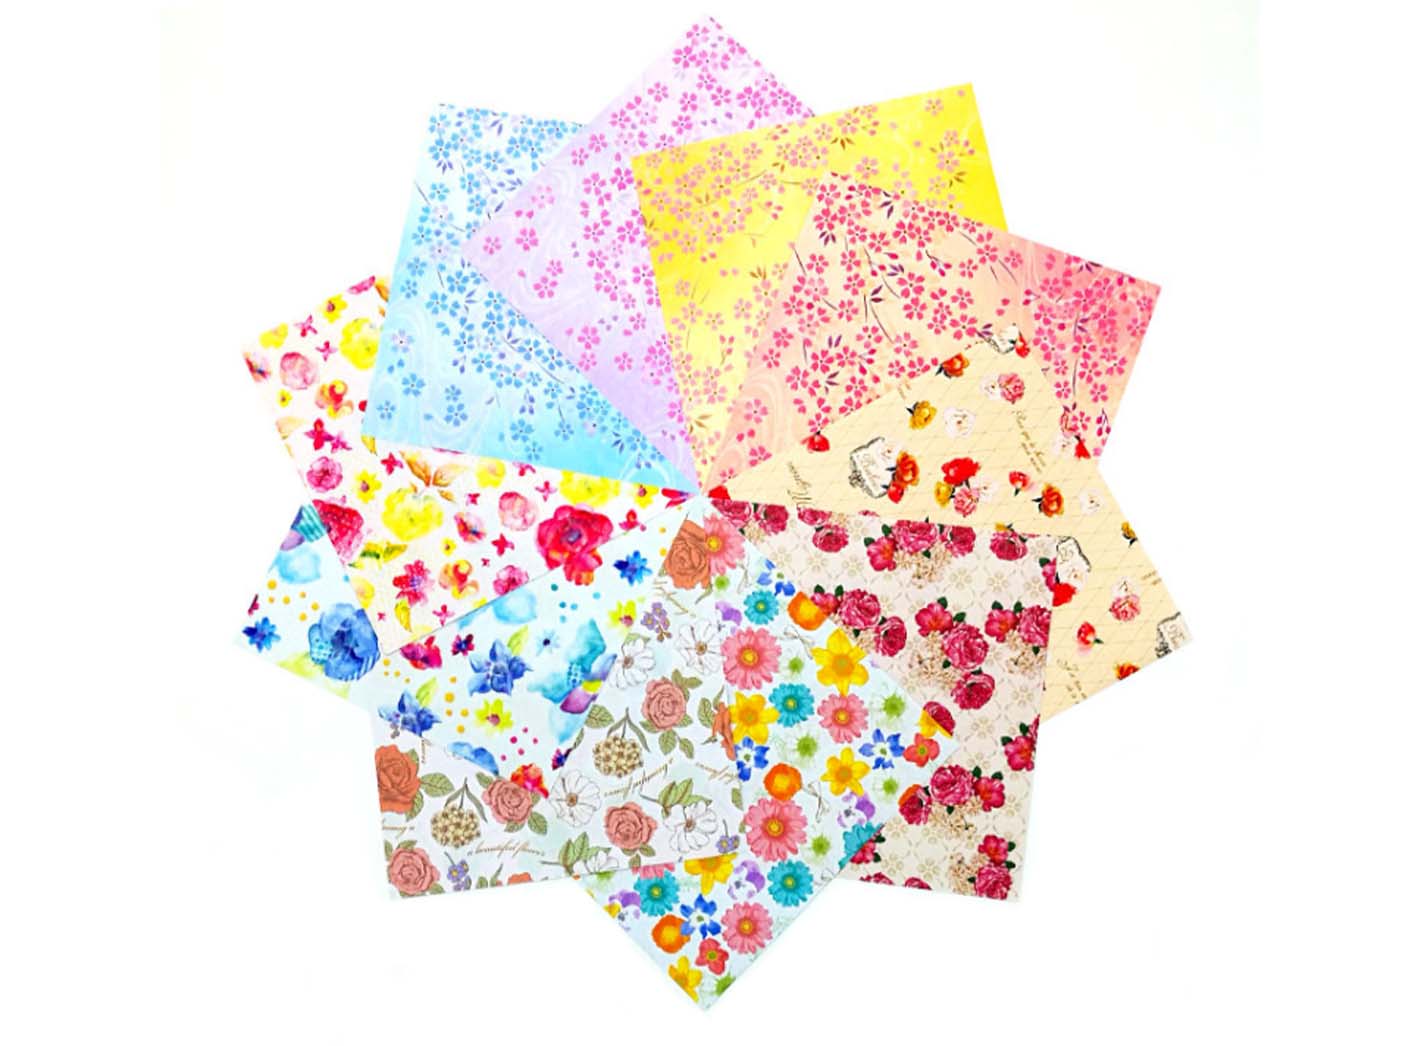 Origami Paper 60 sheets Chiyogami Patterns